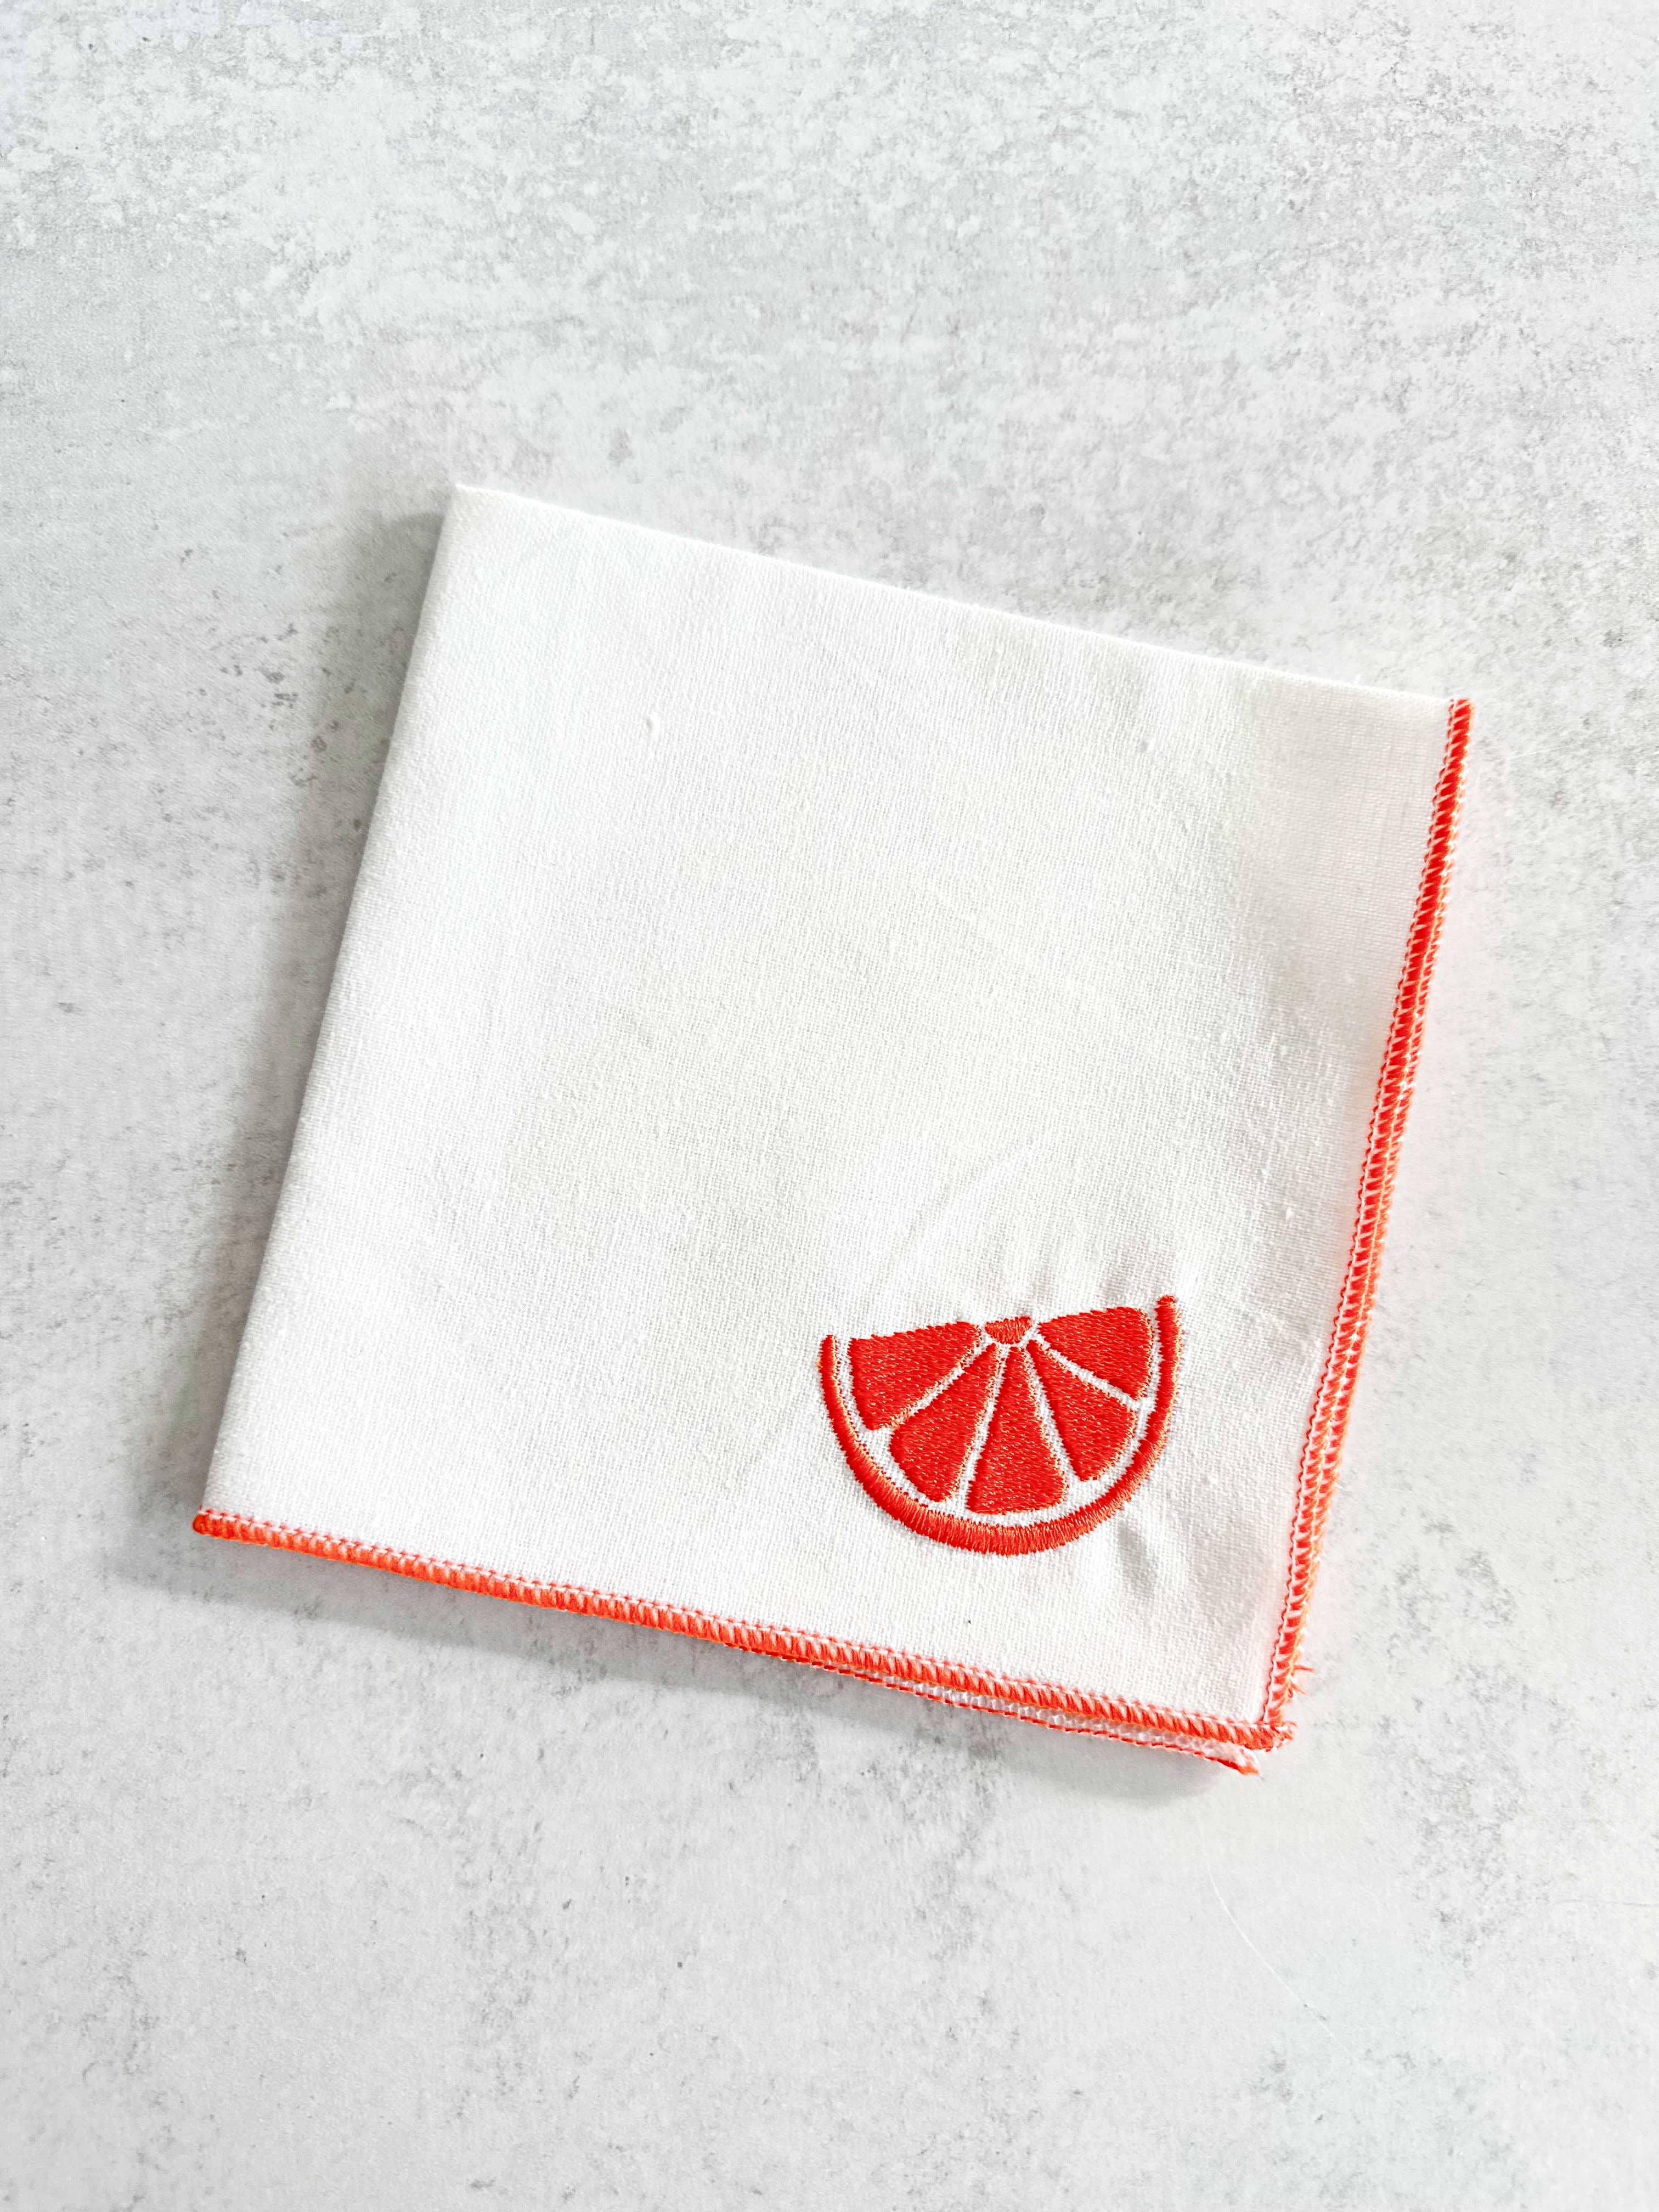 Citrus Embroidered Linen Cocktail Napkins, set of four - Southern Crafted